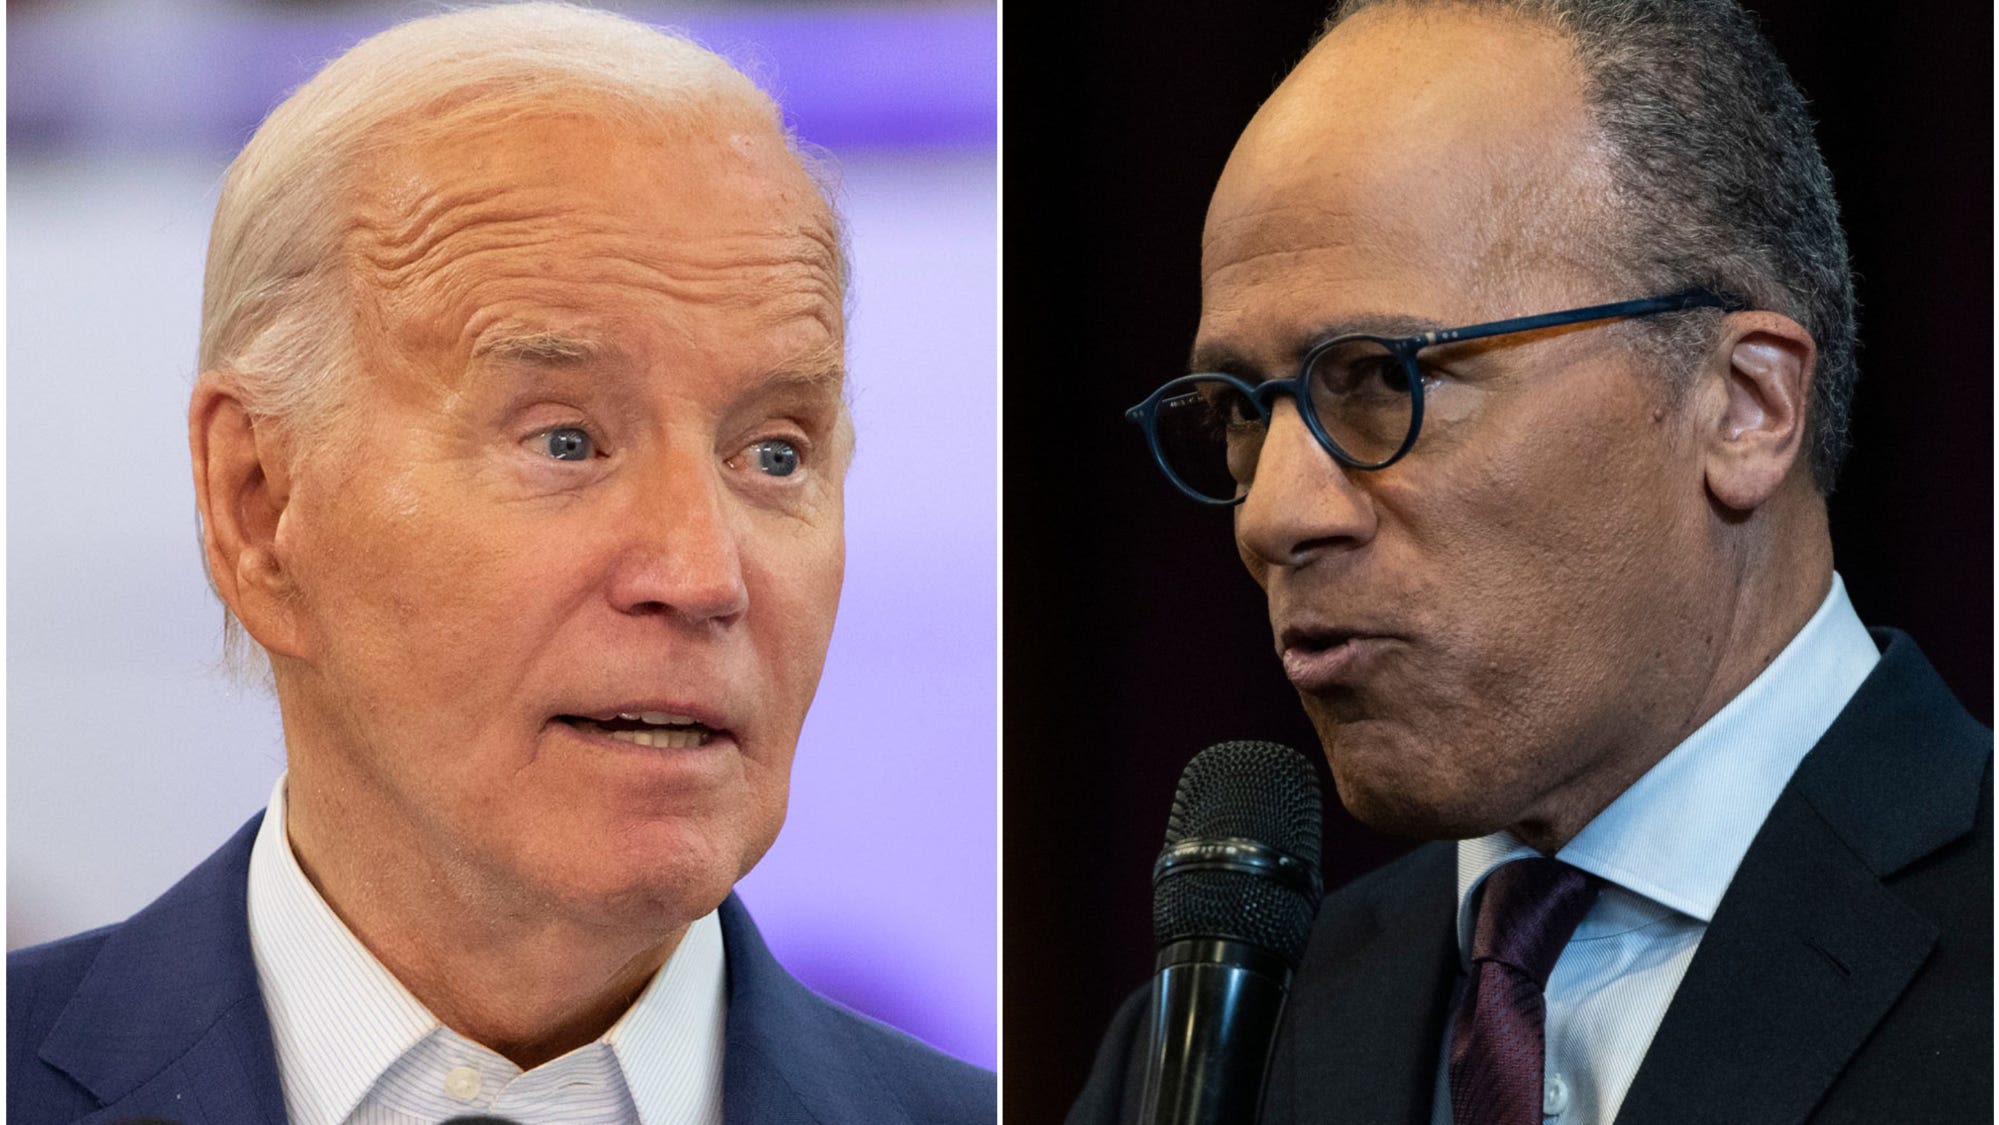 NBC's Lester Holt to interview President Joe Biden Monday. When and where you can watch